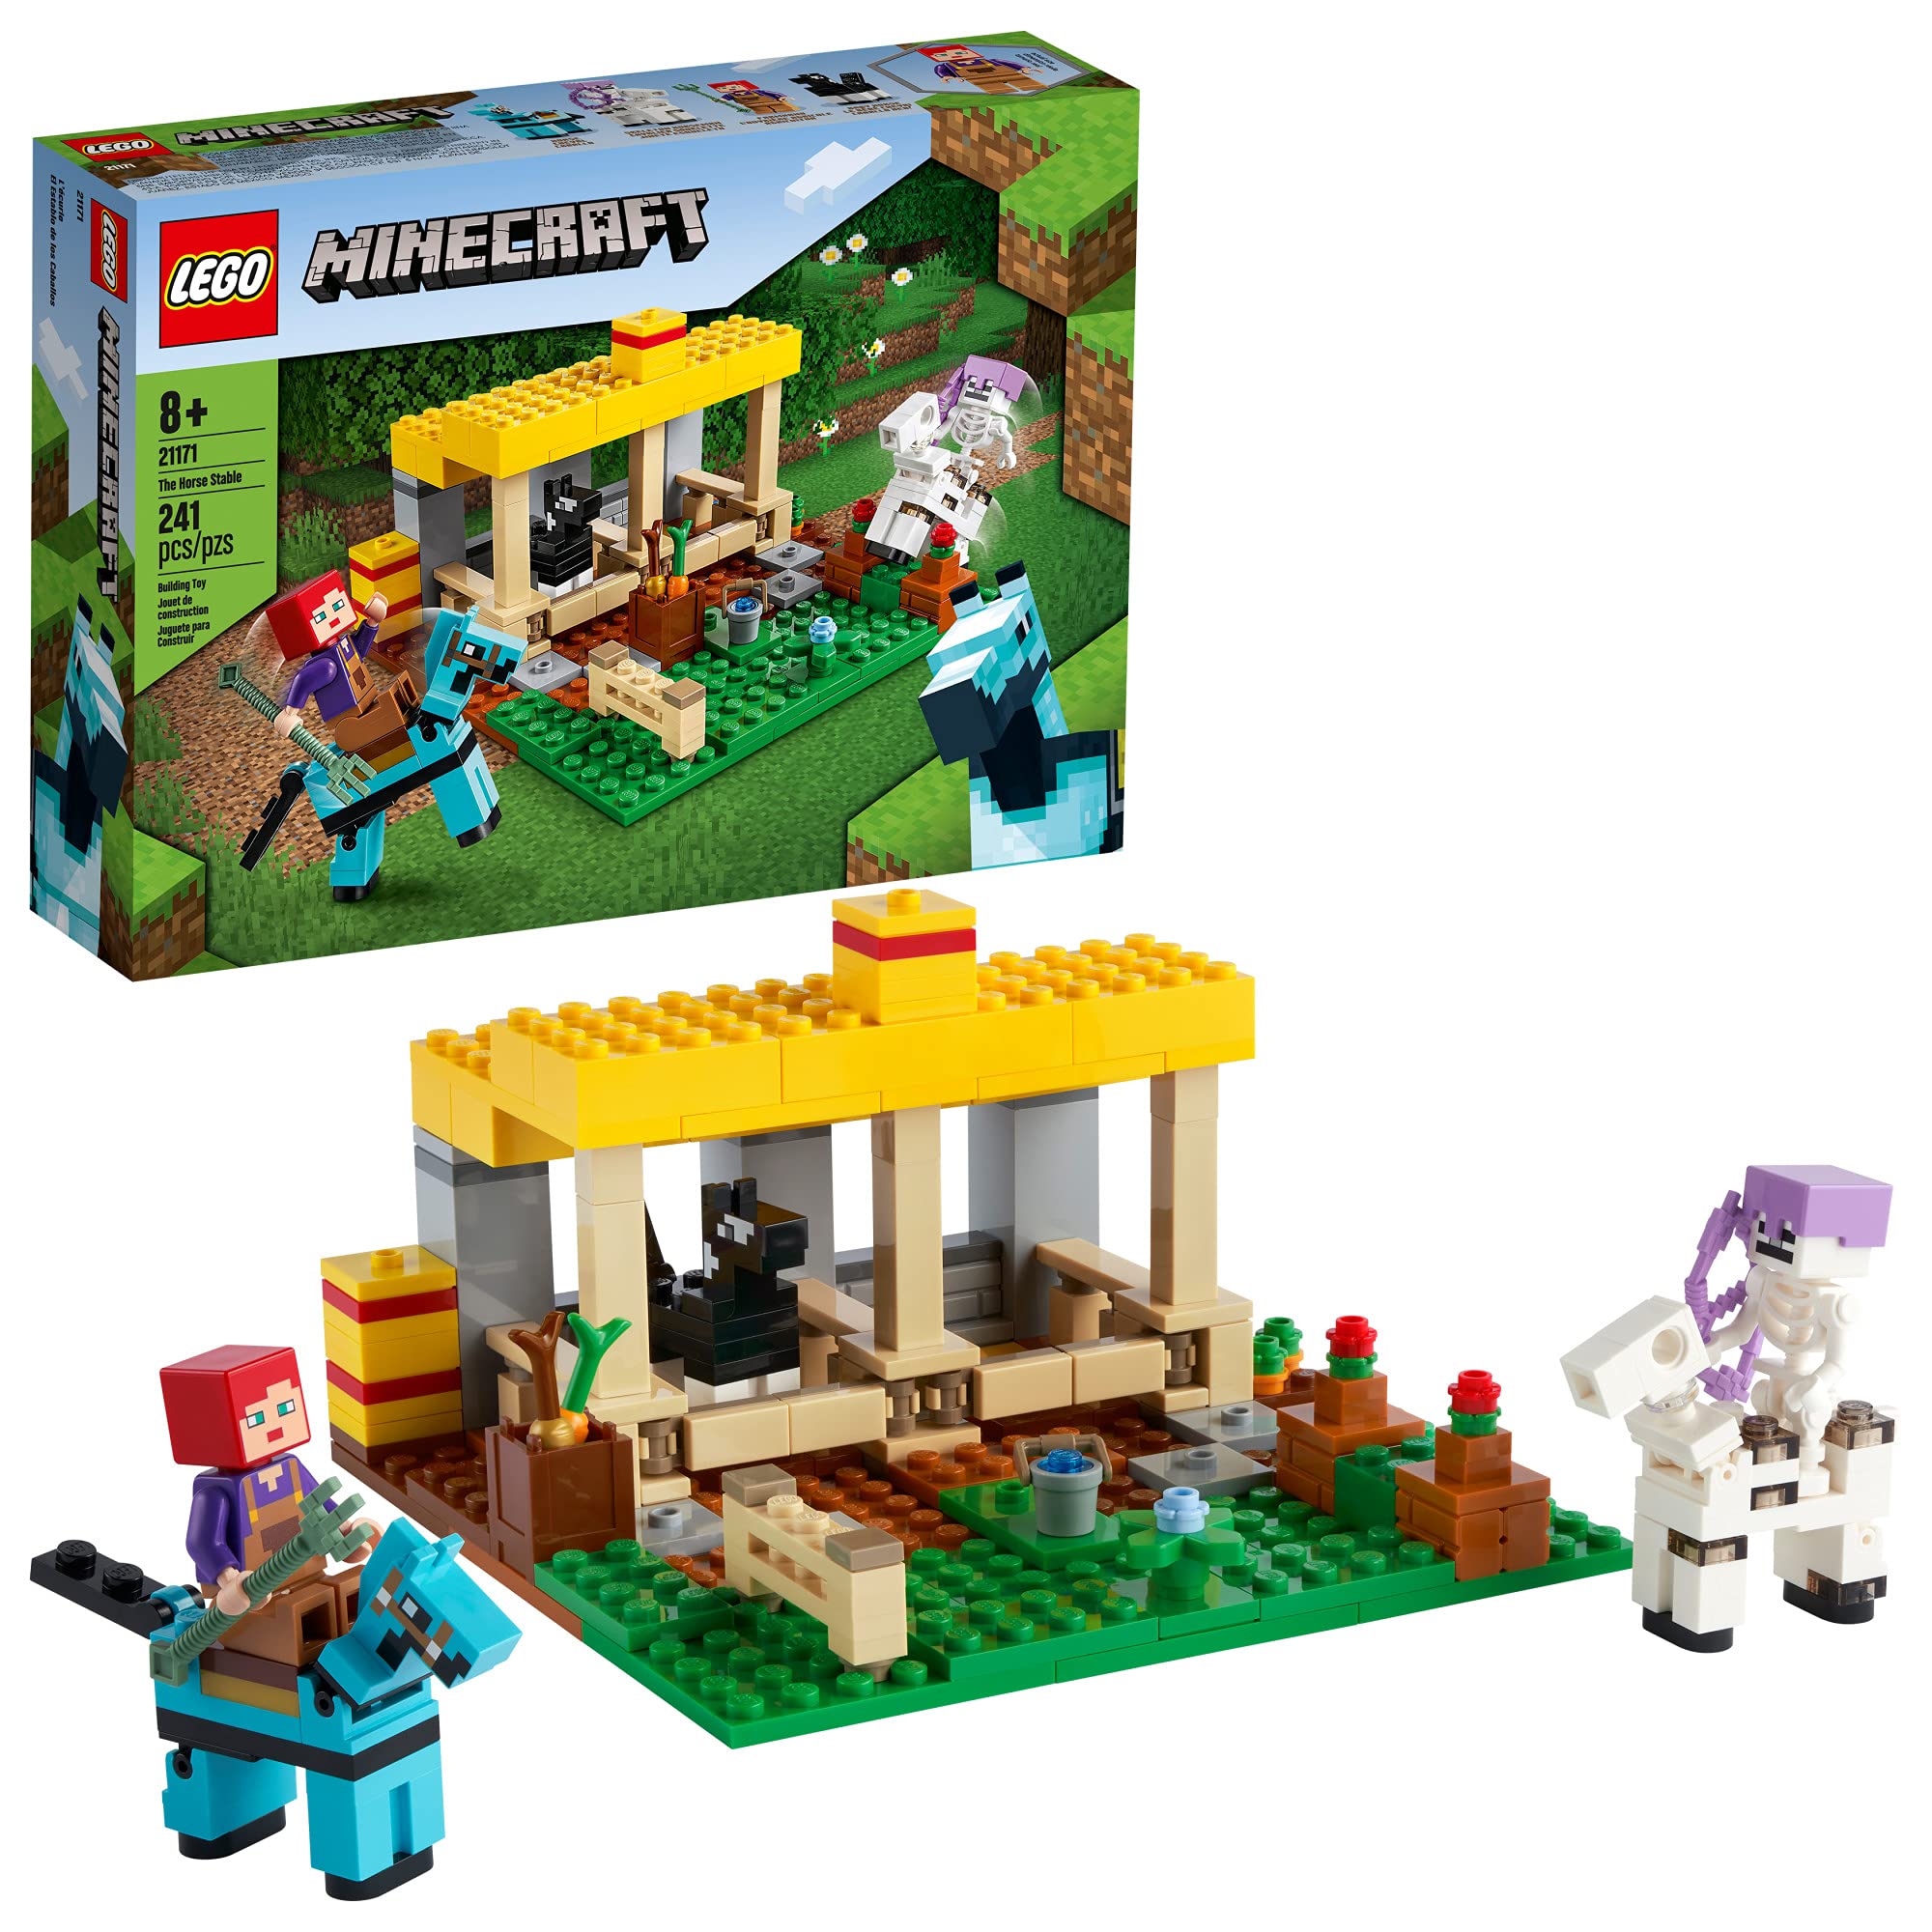 LEGO Minecraft The Horse Stable 21171 (241 Pieces) - $11.48 - Amazon